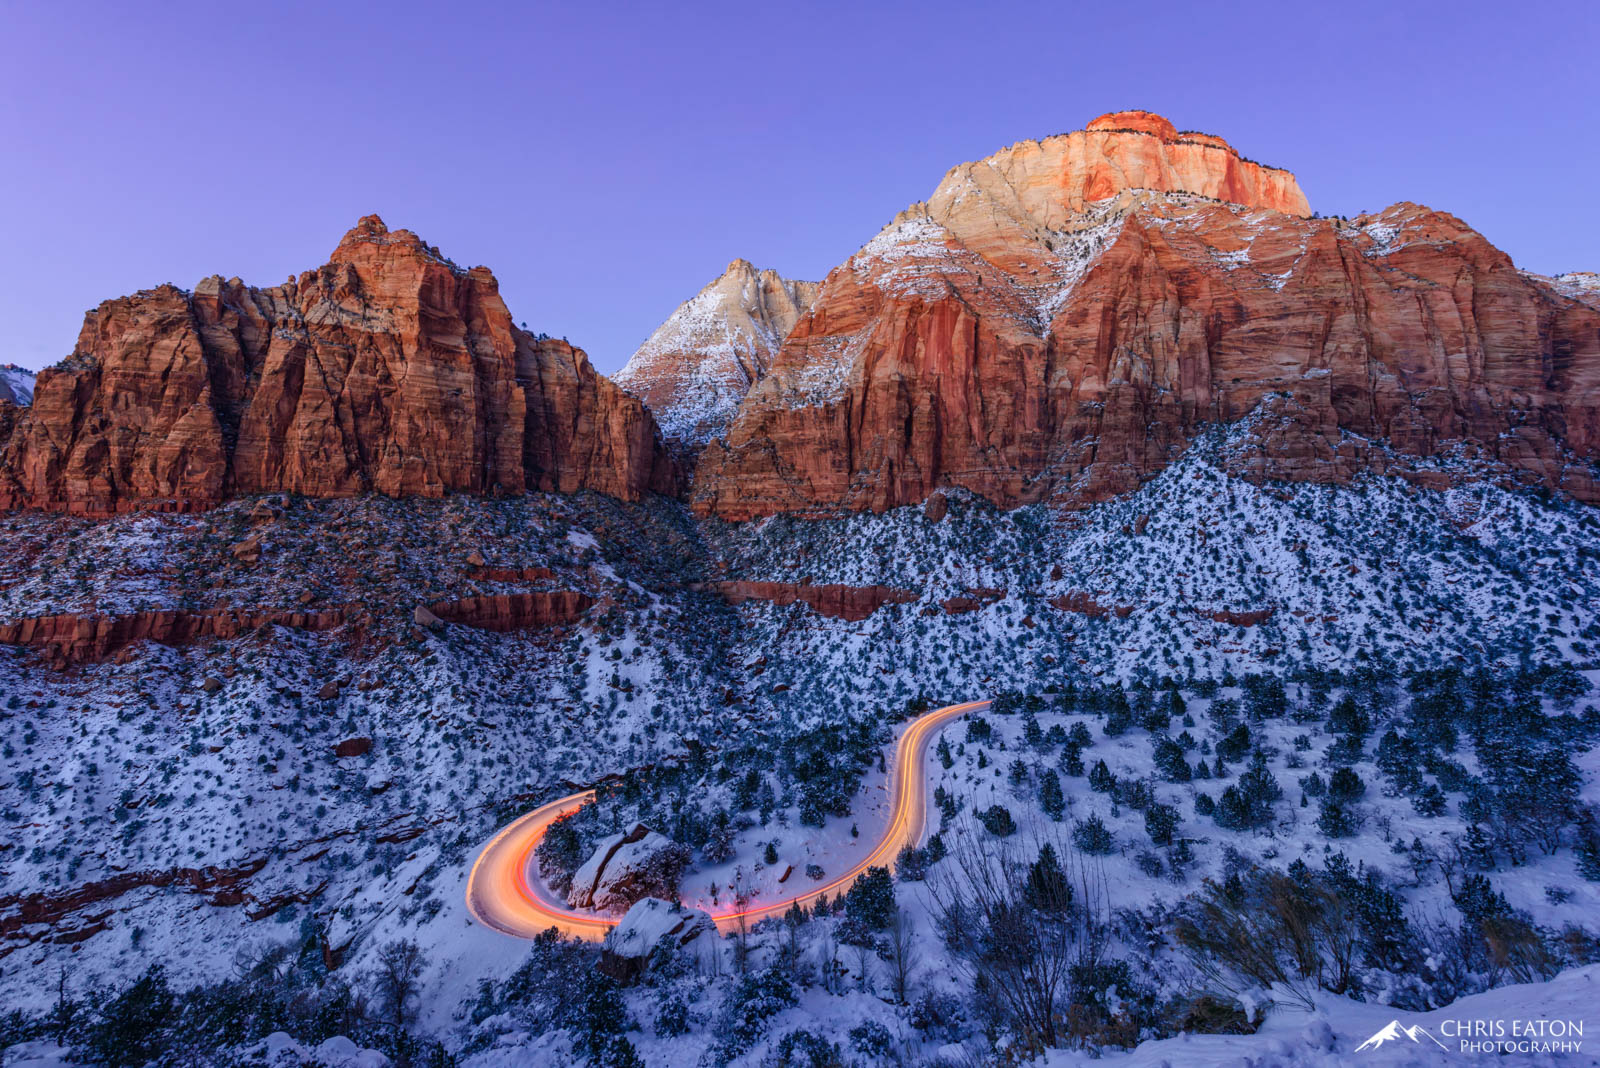 A car's light trail along a winding road in snowy Zion National Park.